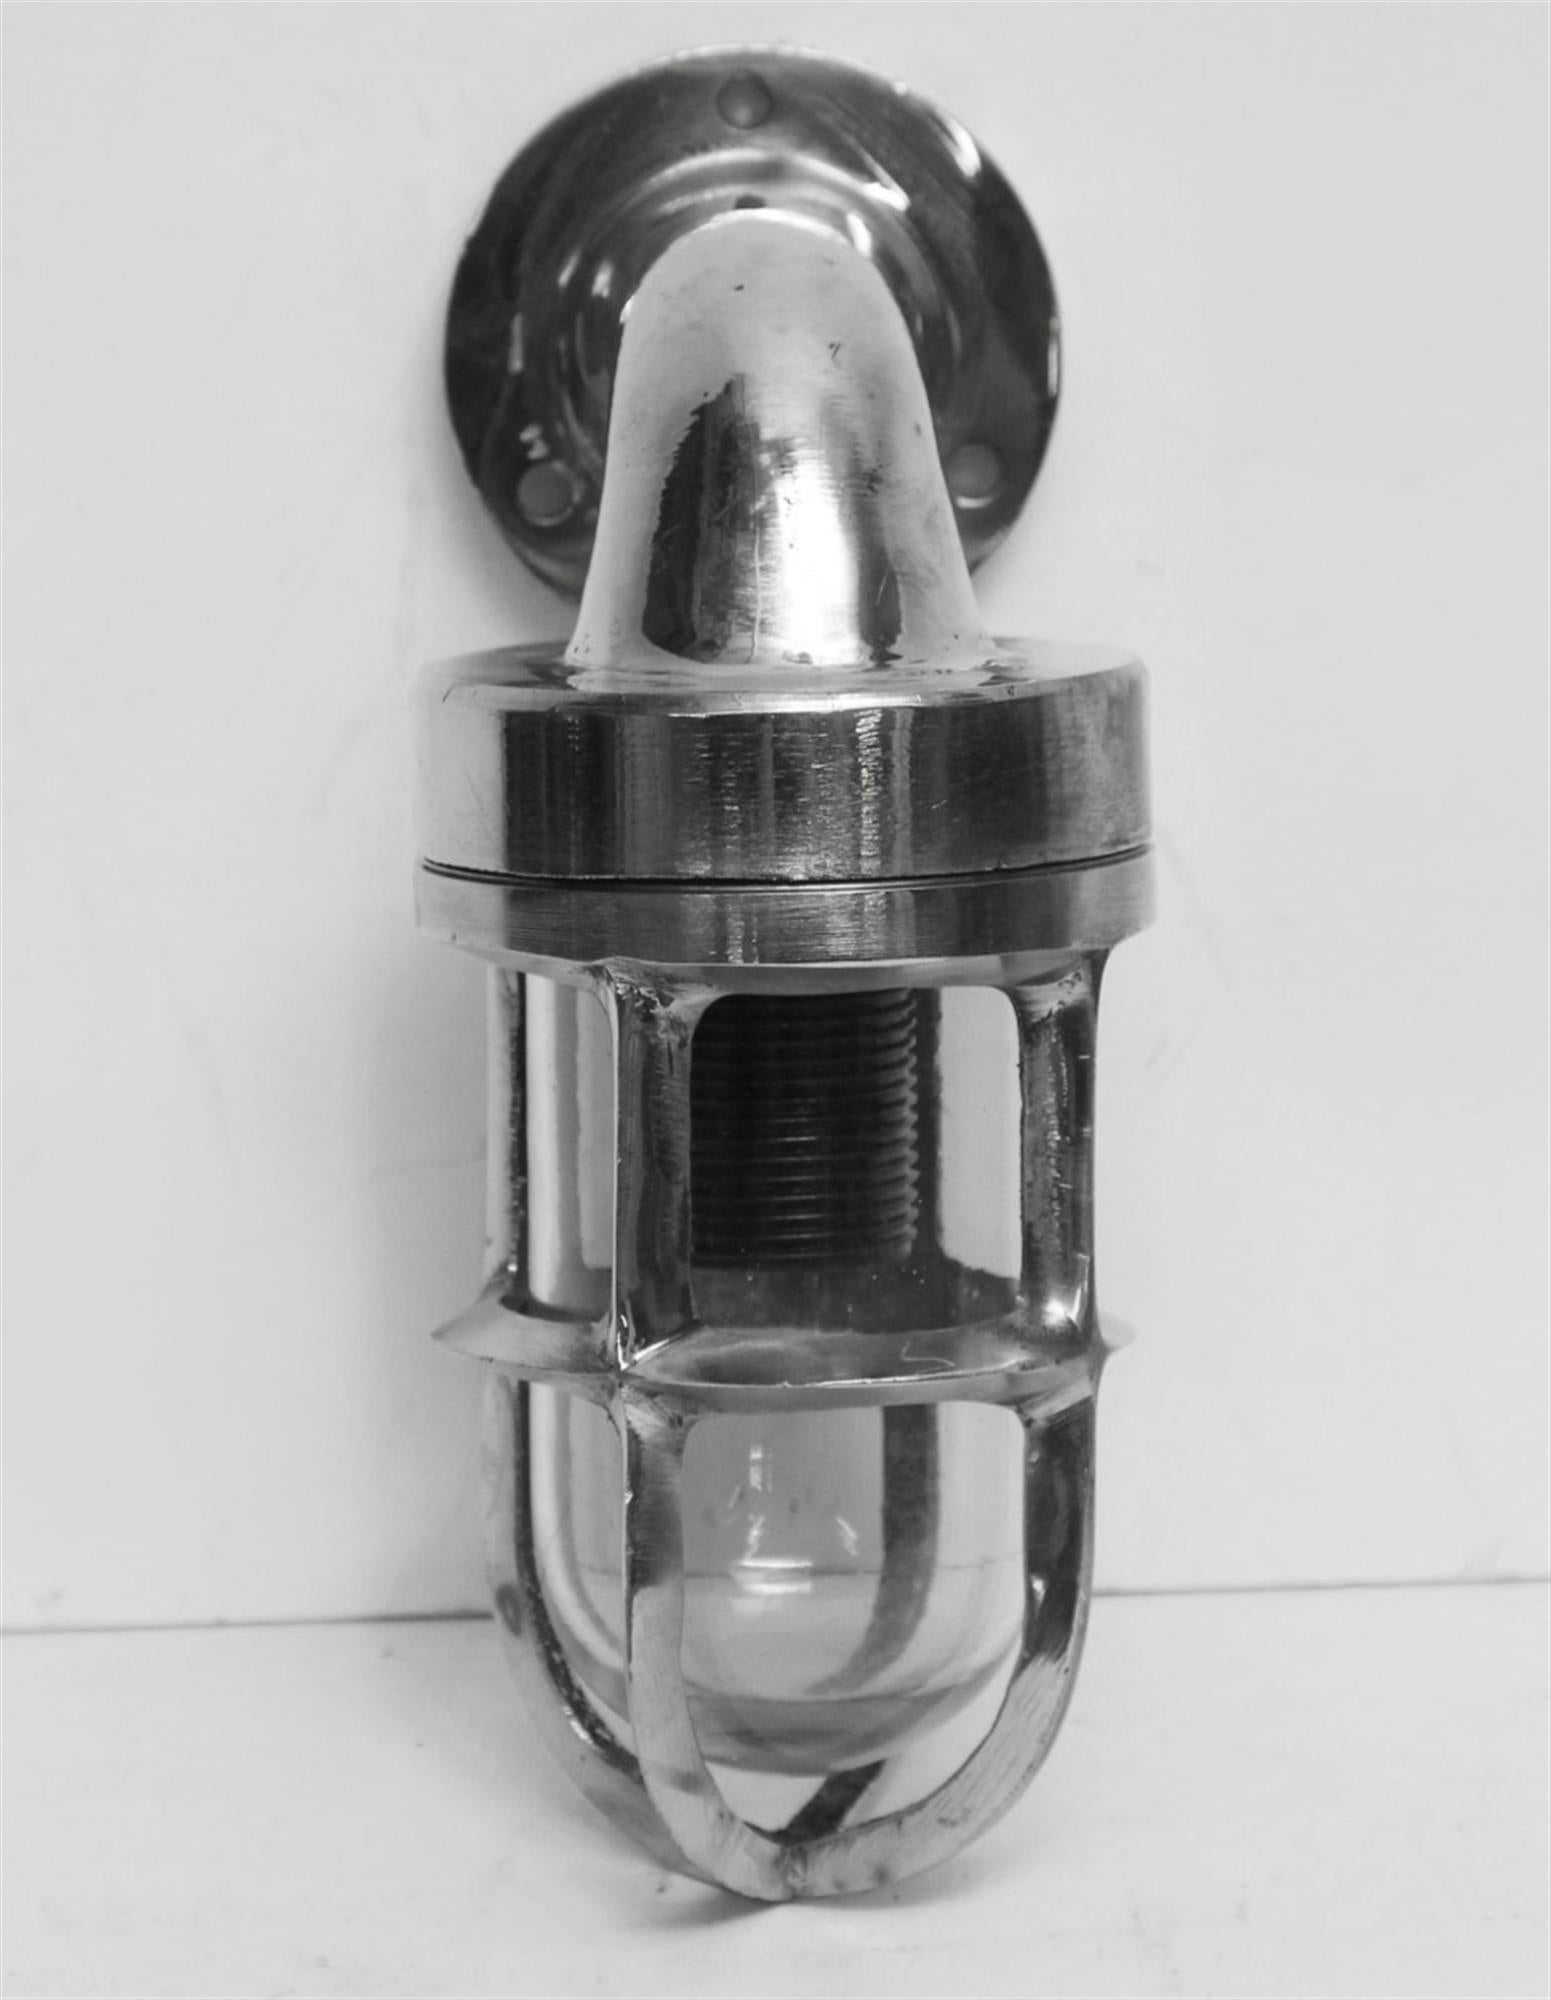 These are mini sconces originally made for ships, now used in commercial and residential applications. They are constructed of aluminium and glass. Quantity available at time of posting. Please inquire. Priced each. This can be seen at our 302